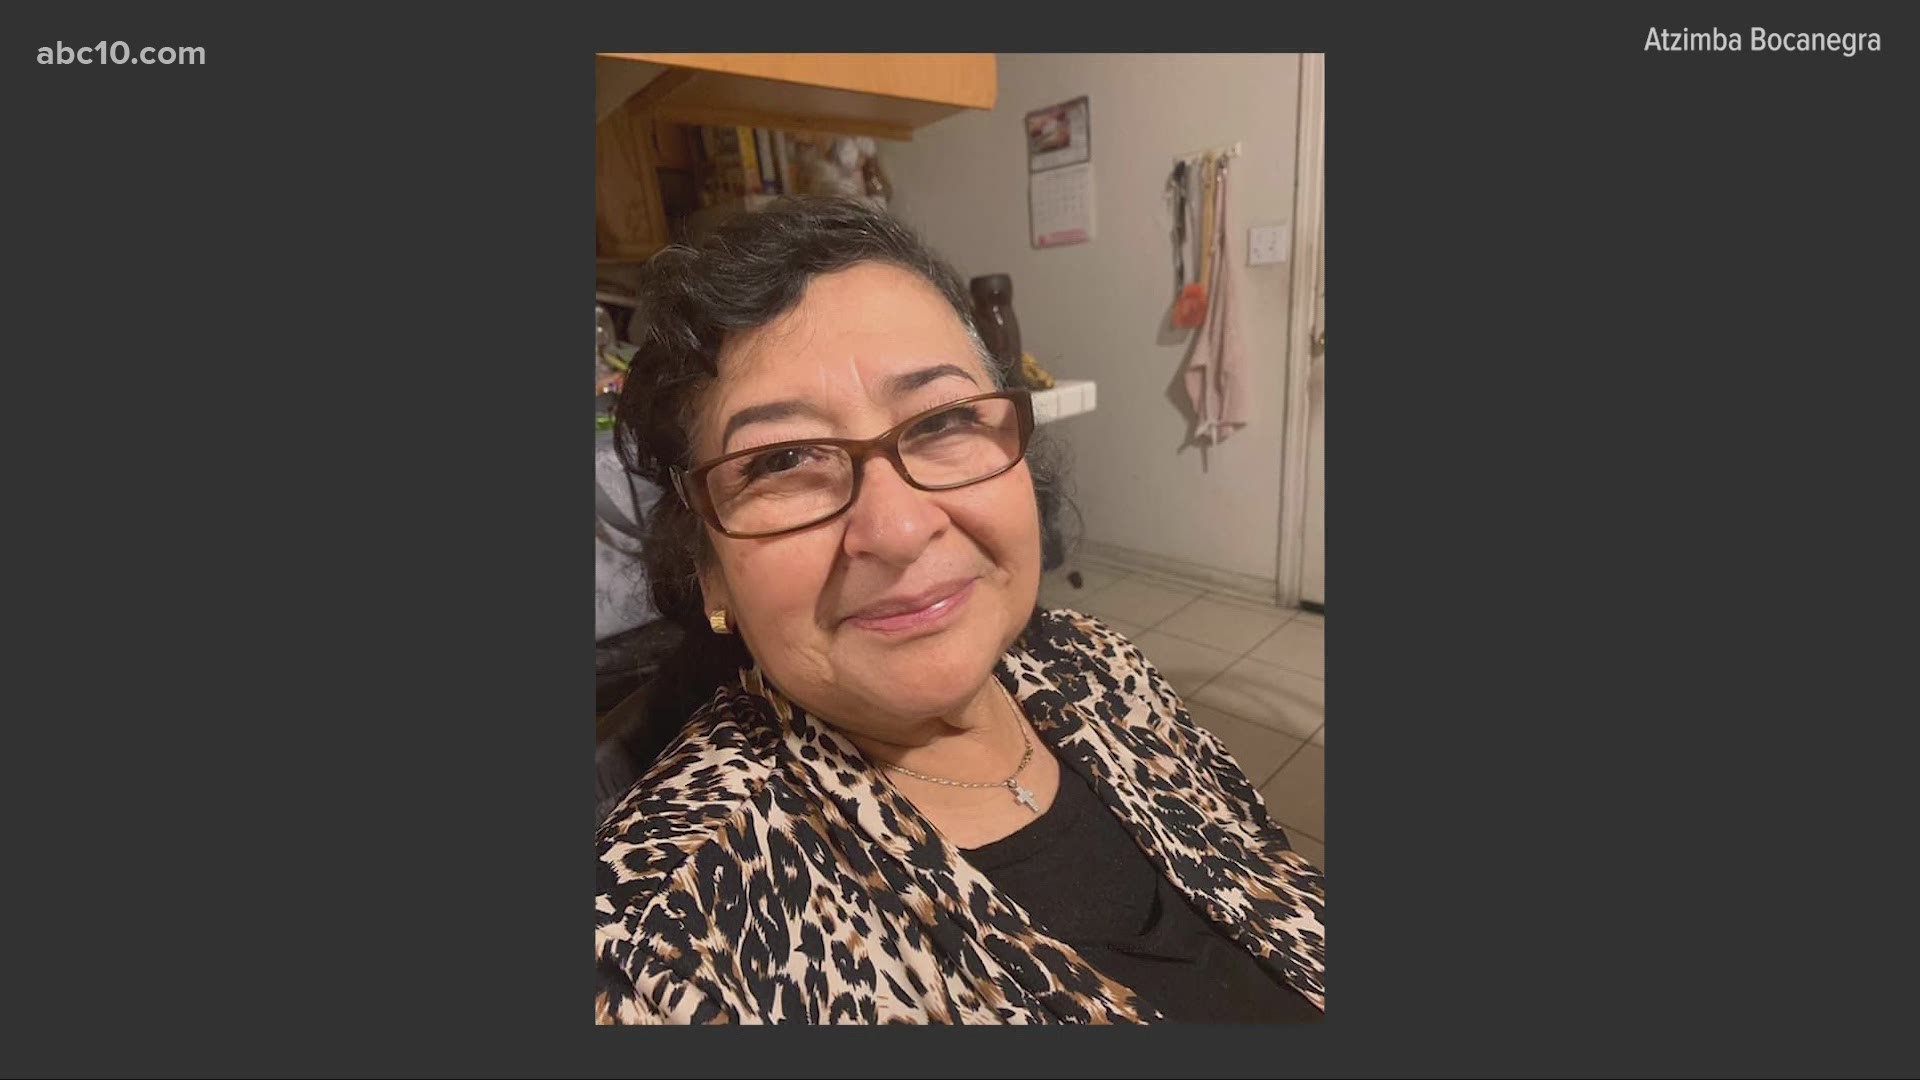 Family members are remembering the victim, Adelina Rendon Diaz, a local restaurant owner. Diaz's grandson says she truly represented the American Dream.